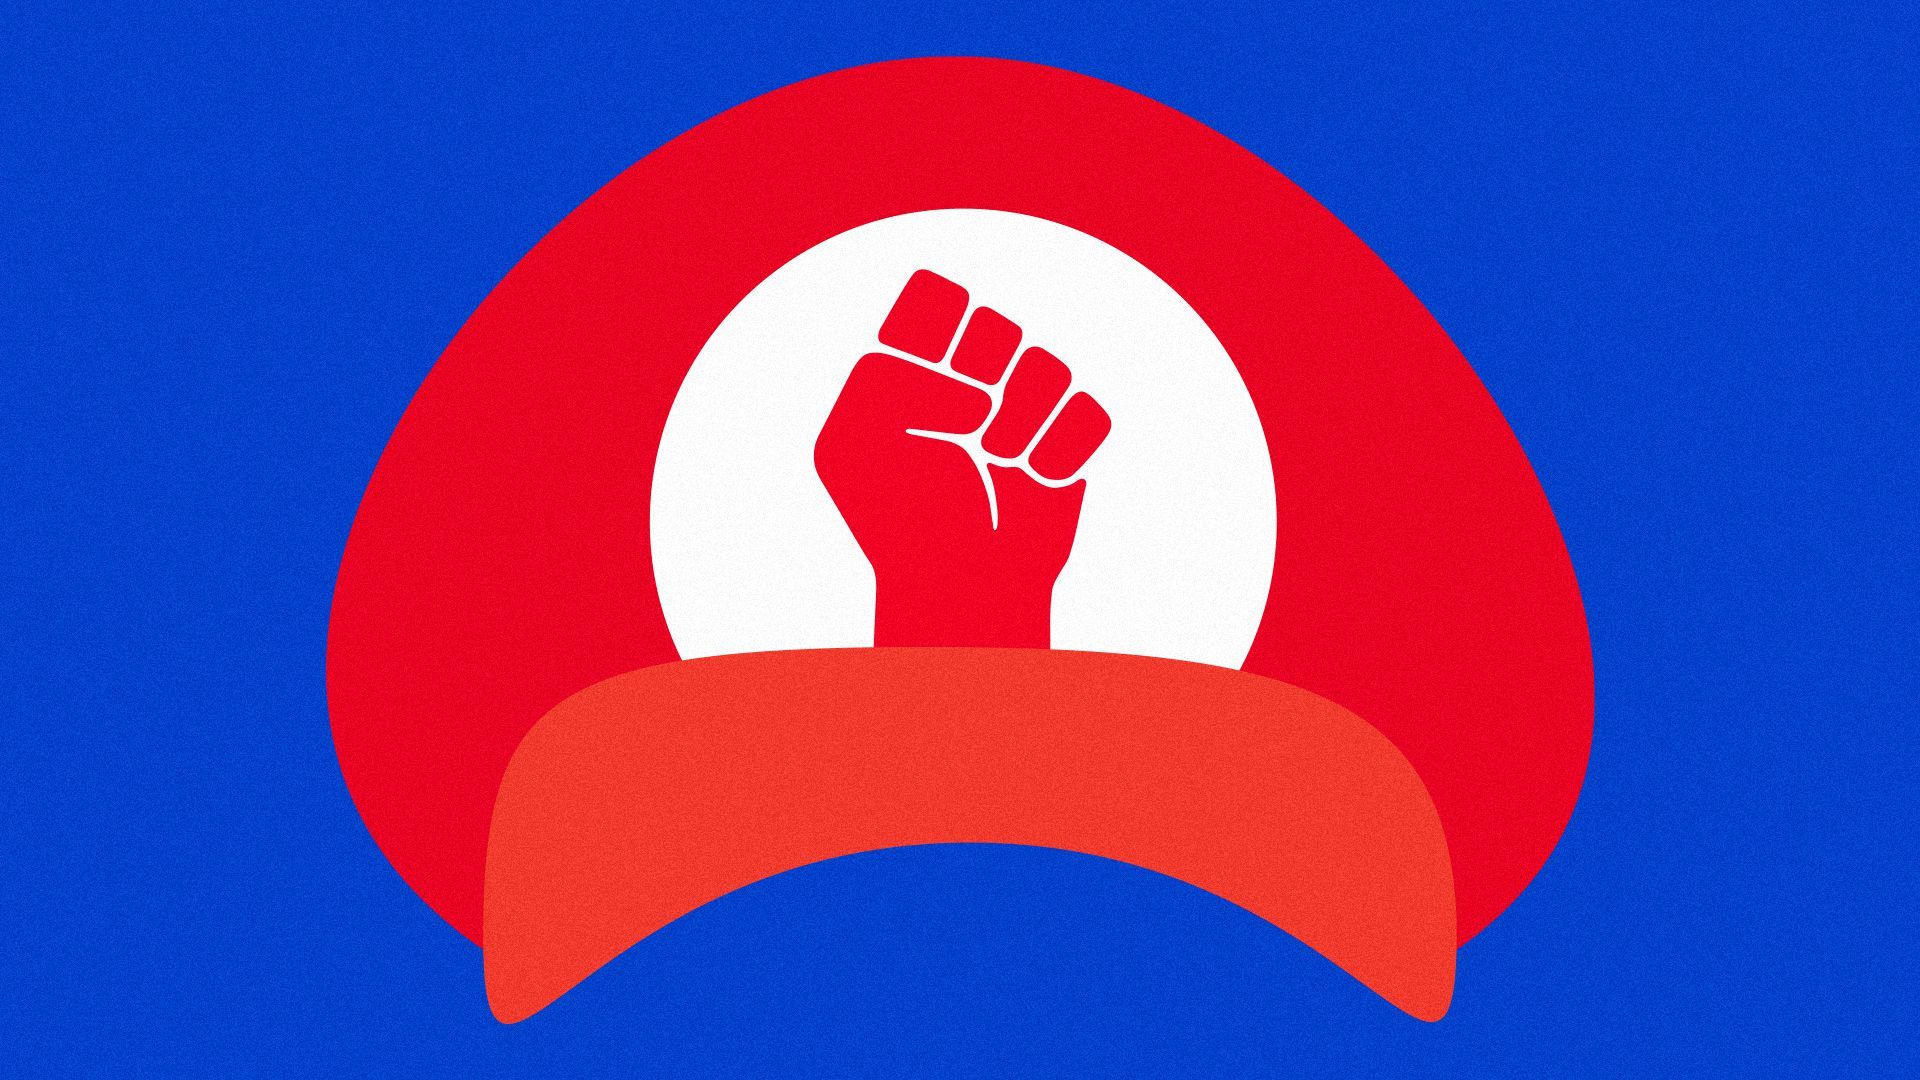 Illustration of Mario's hat with a fist instead of an 